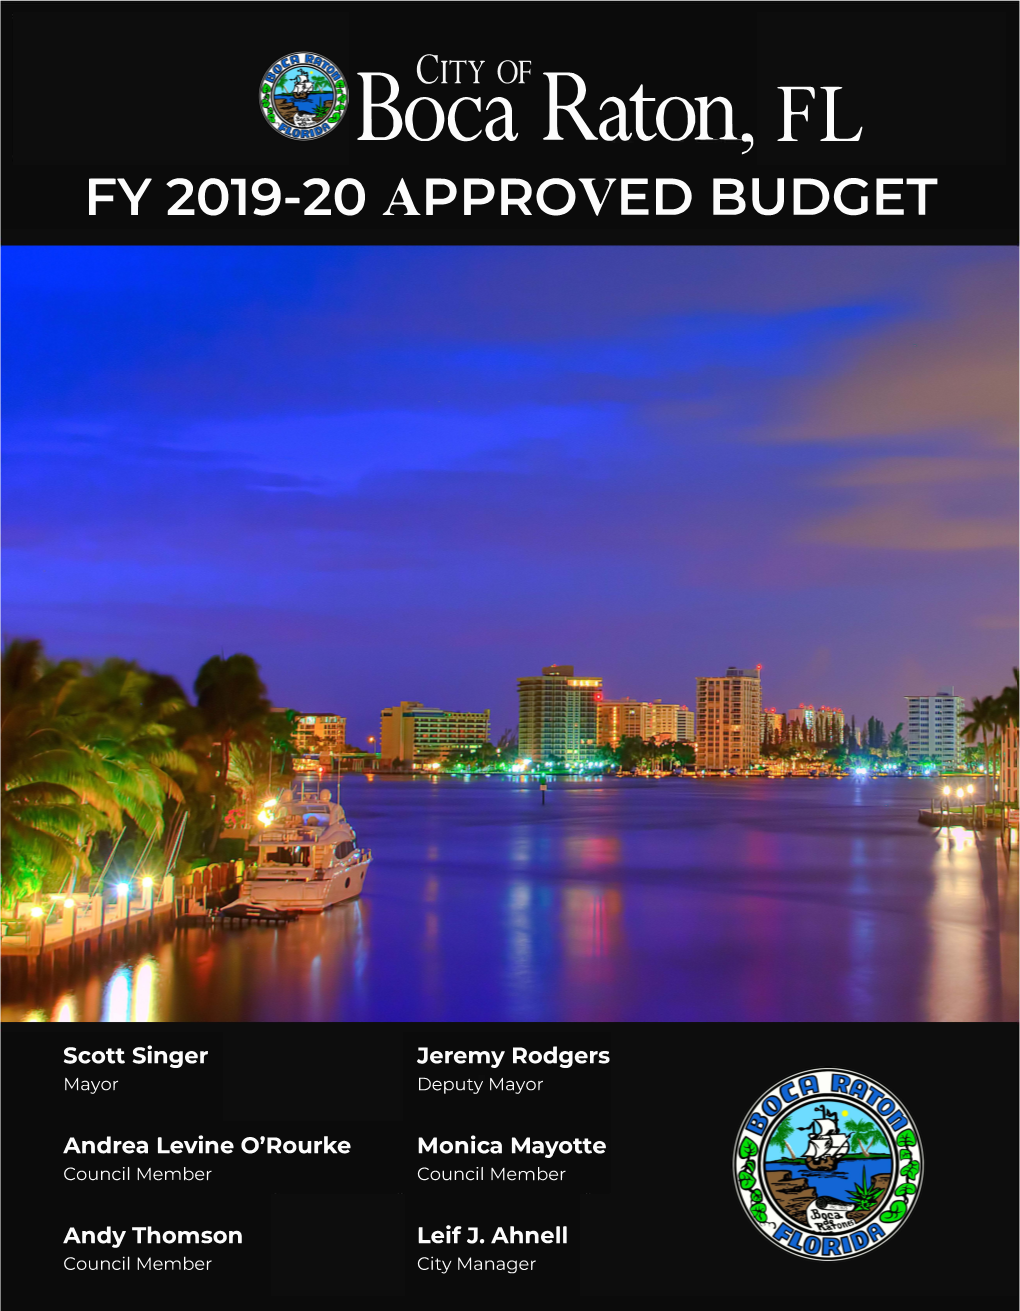 Fiscal Year 2019-2020 Approved Budget